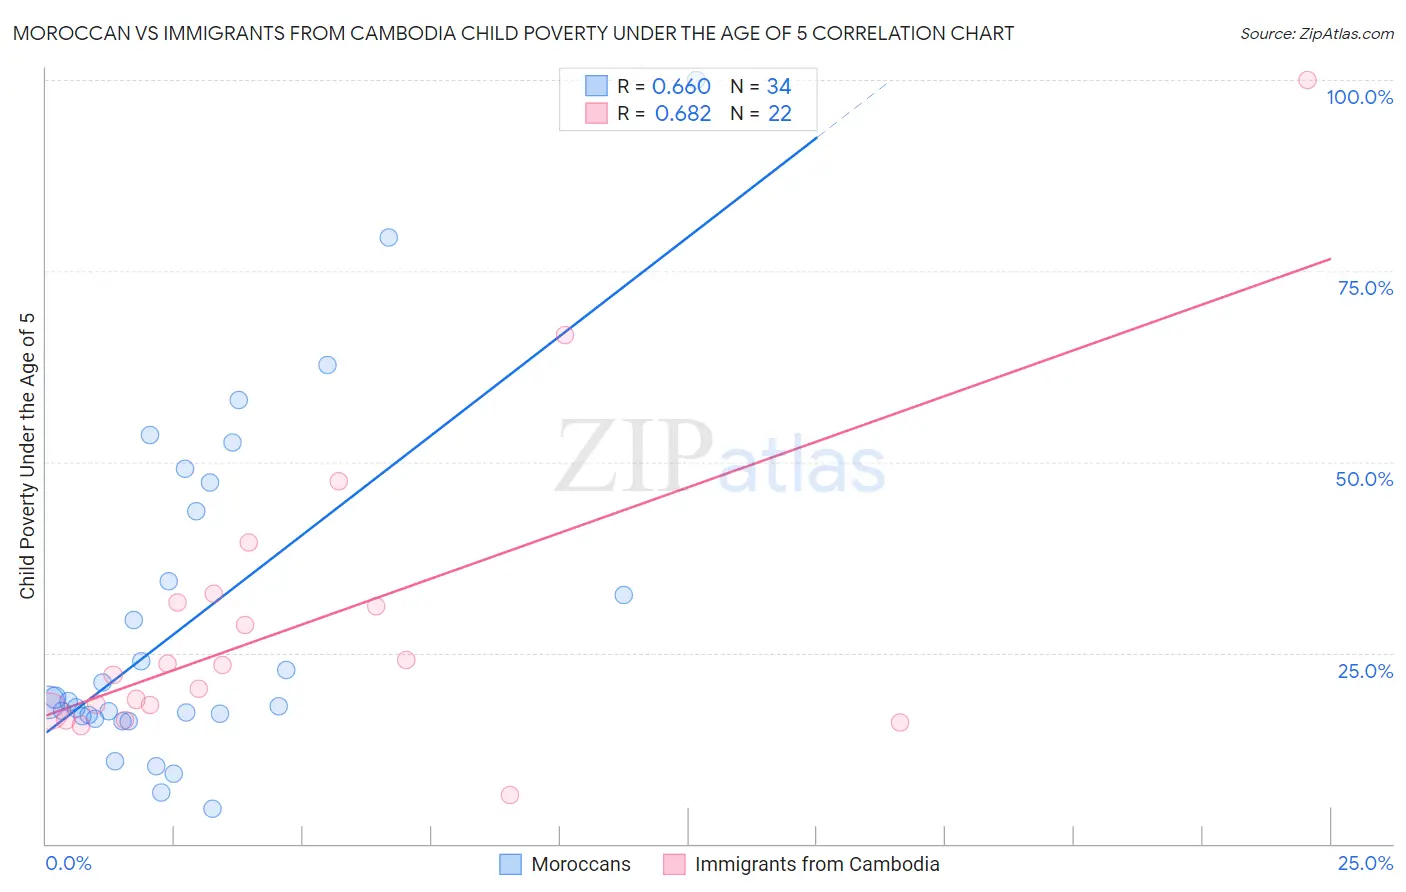 Moroccan vs Immigrants from Cambodia Child Poverty Under the Age of 5